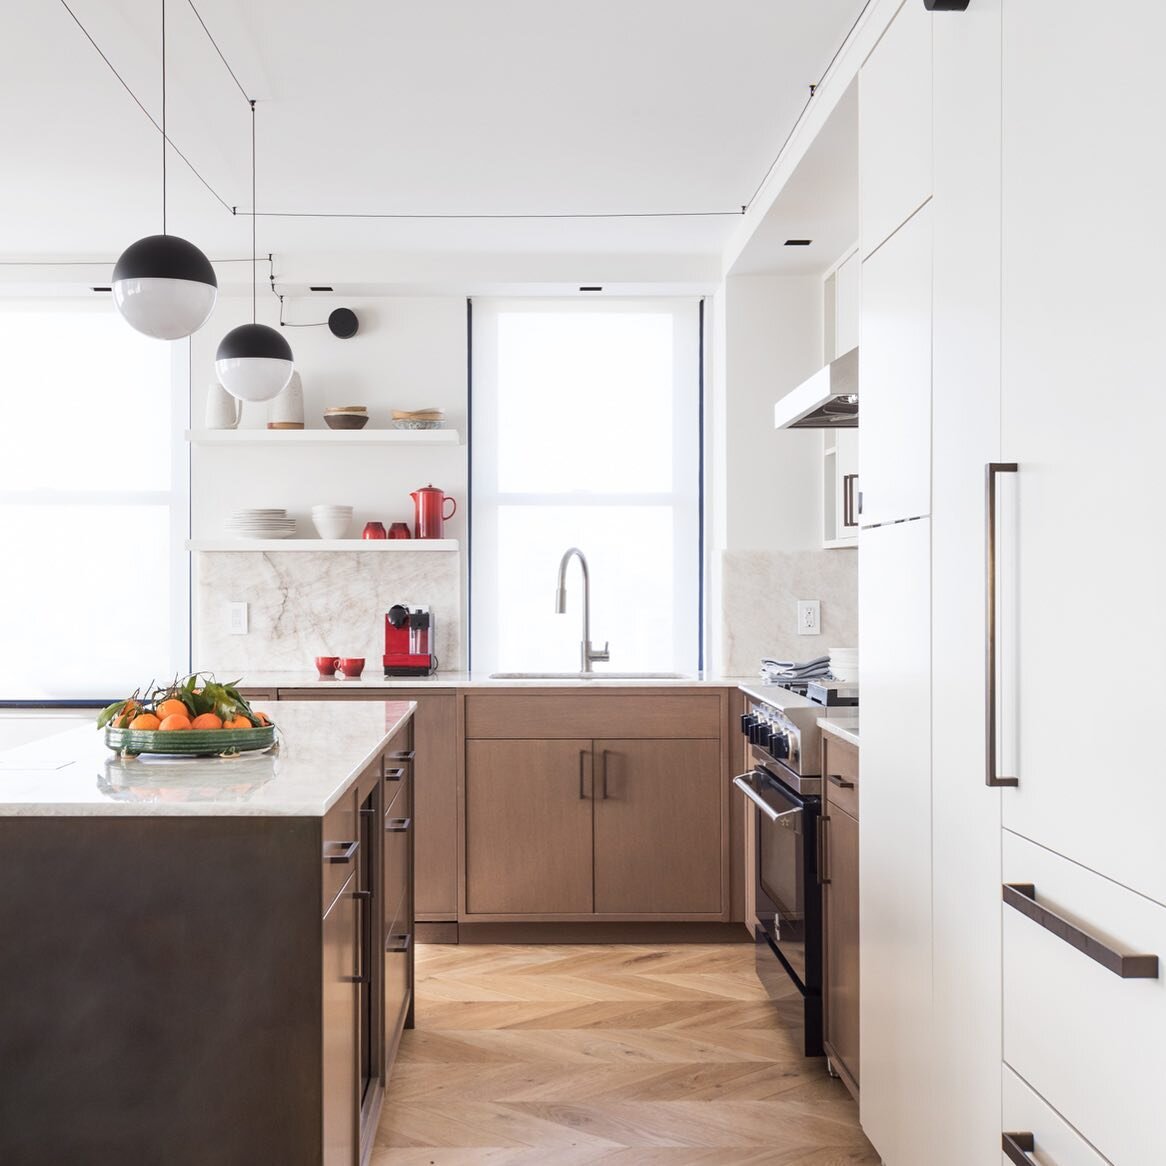 This fully custom kitchen is complete with floating shelves, minimal cabinets, USAI light fixtures, and a metal blackened steel island

Designer @pappasmirondesign 
Architect @dmadpc

&mdash;&mdash;
#nycapartment #generalcontractor #generalcontractor